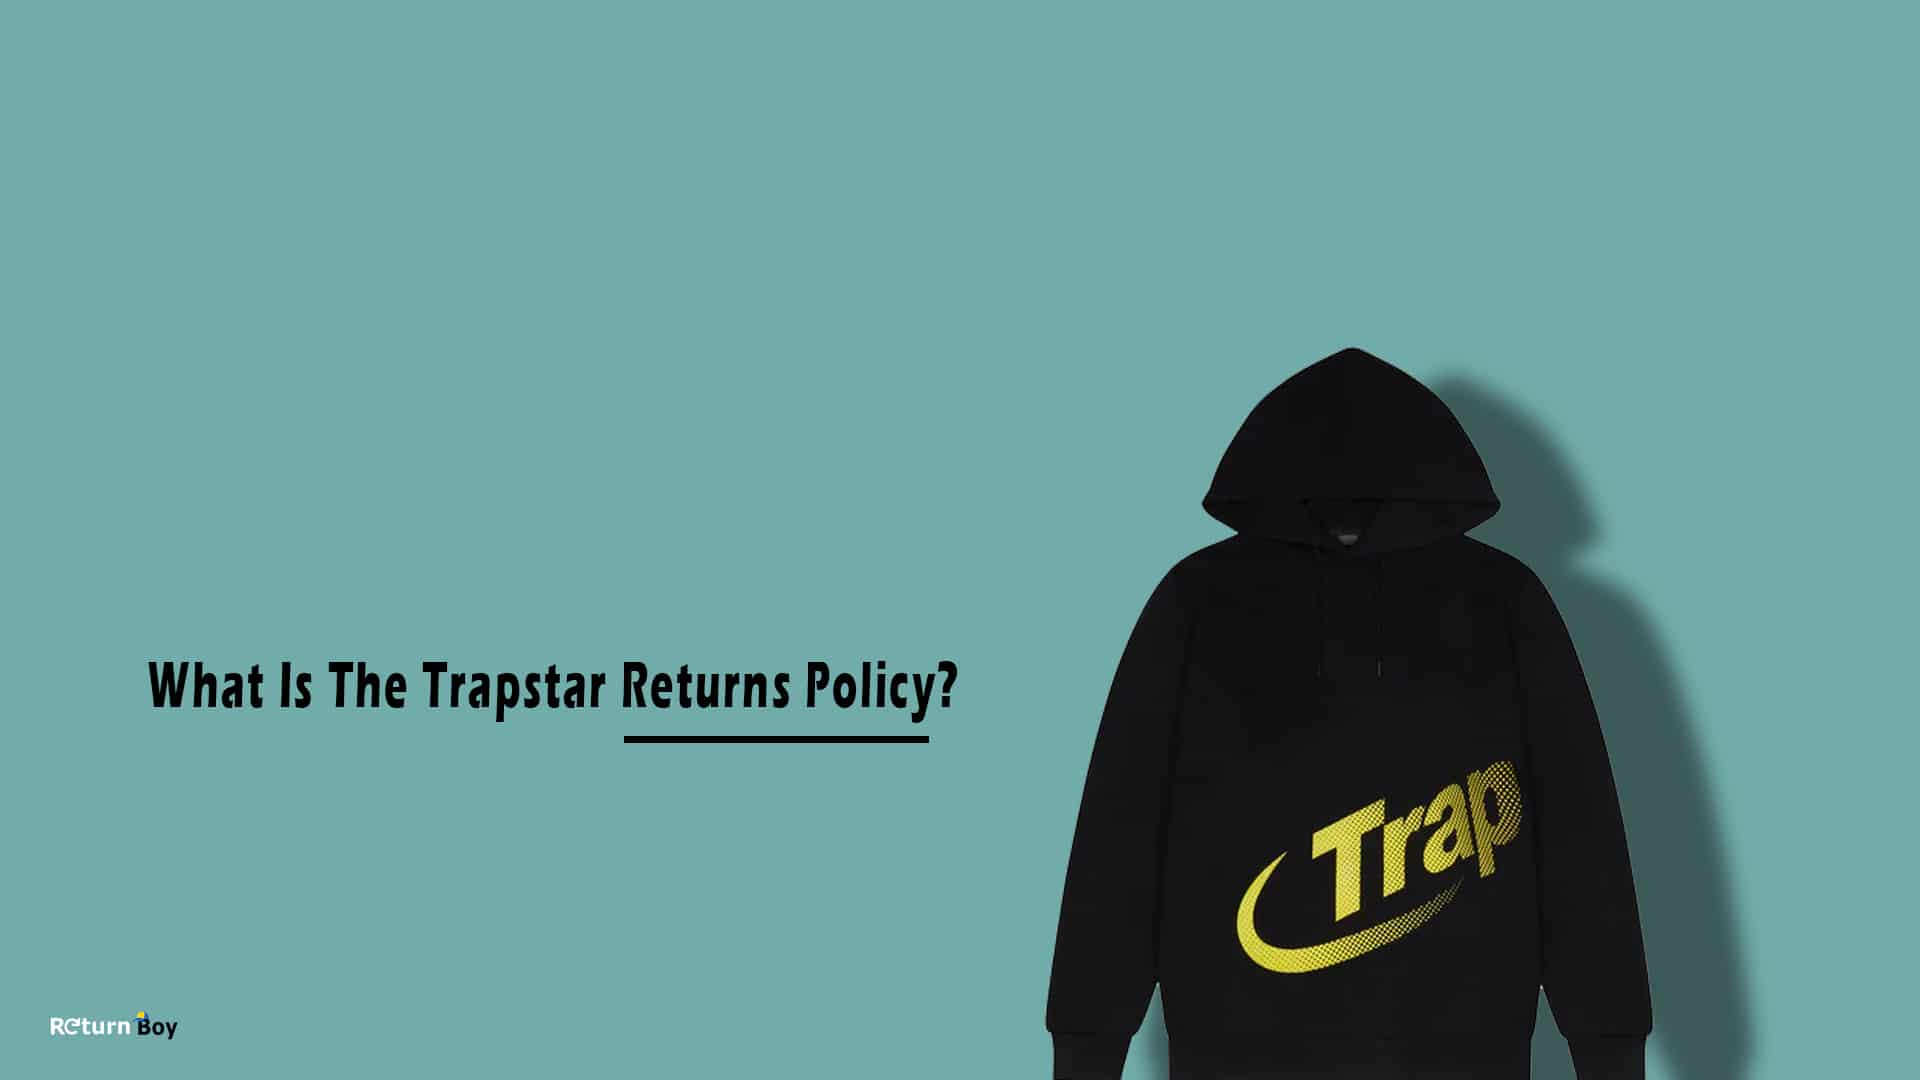 What is the Trapstar Returns Policy